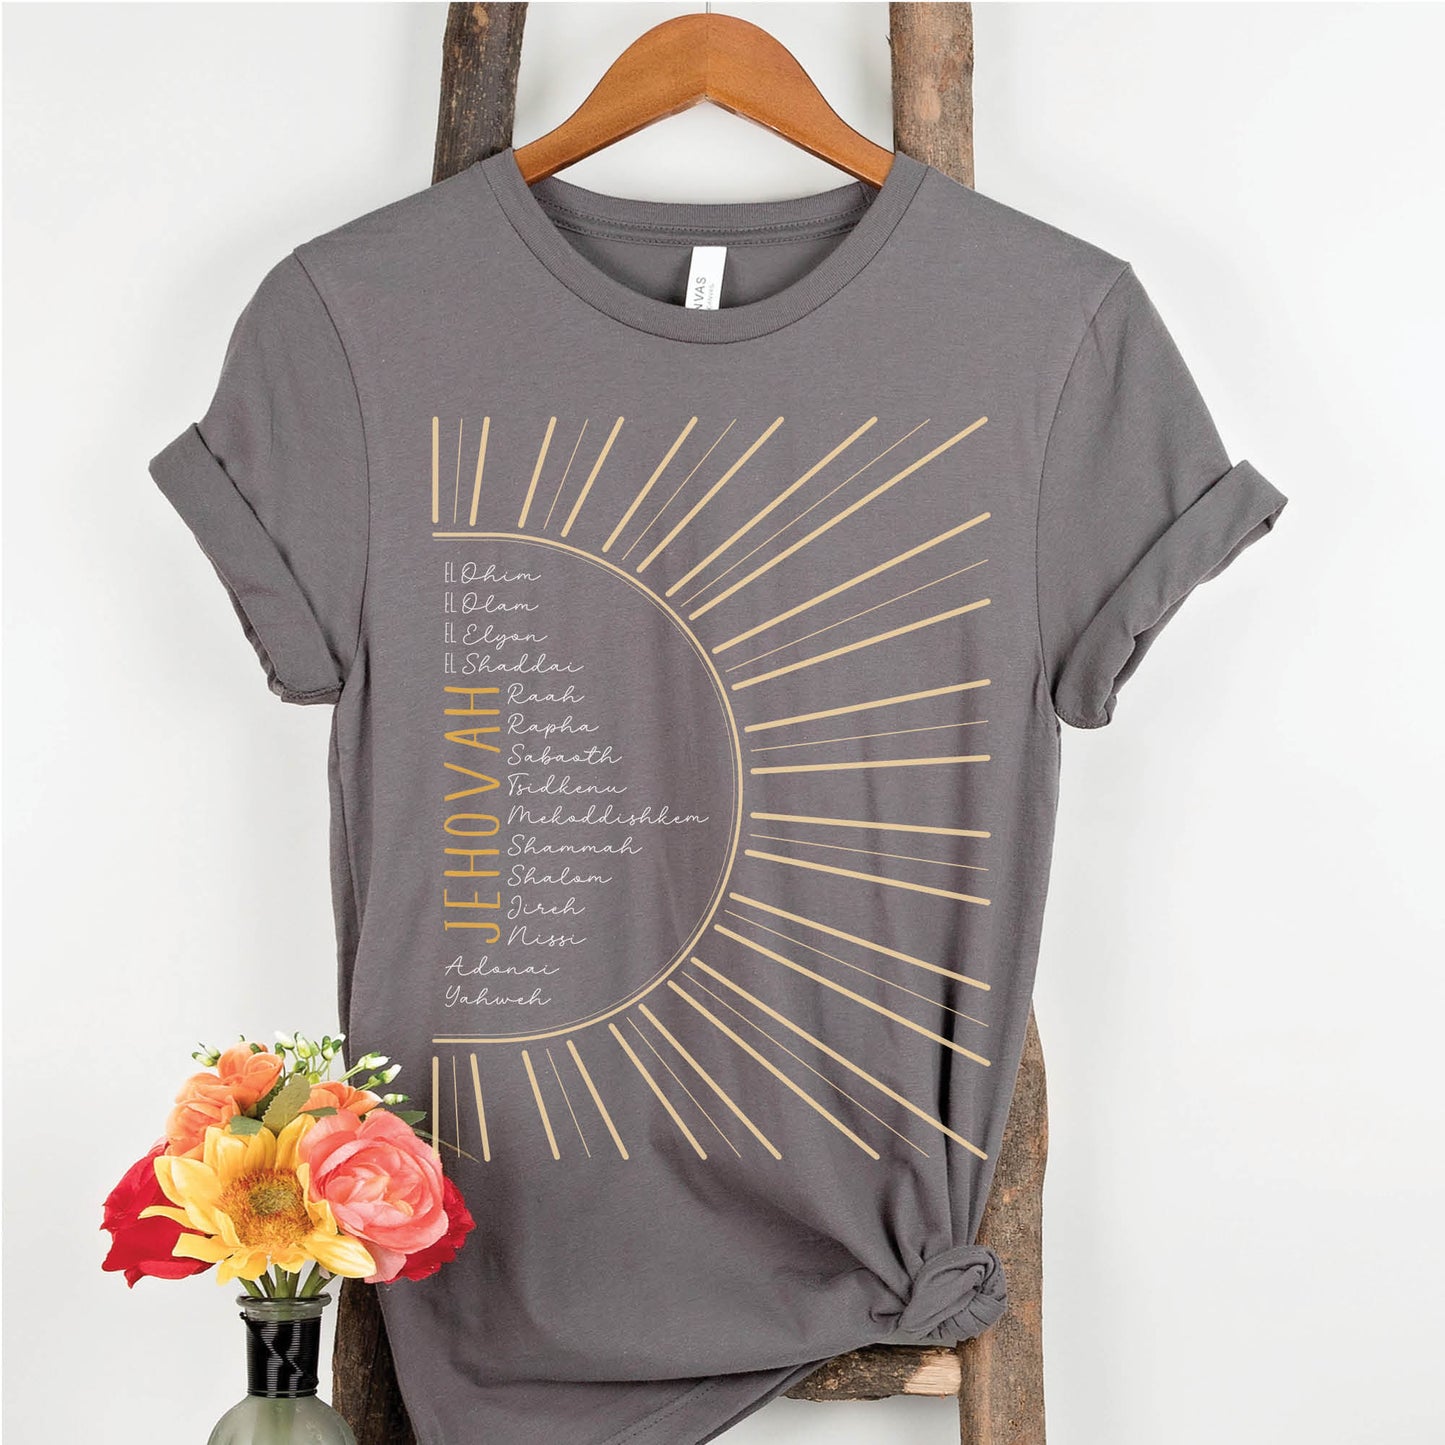 The Names of God Hebrew Christian Old Testament Bible List Sunshine T-Shirt, printed in gold and white on Asphalt Medium Gray Bella-Canvas 3001 t-shirt, women's soft unisex fit regular and plus size tee